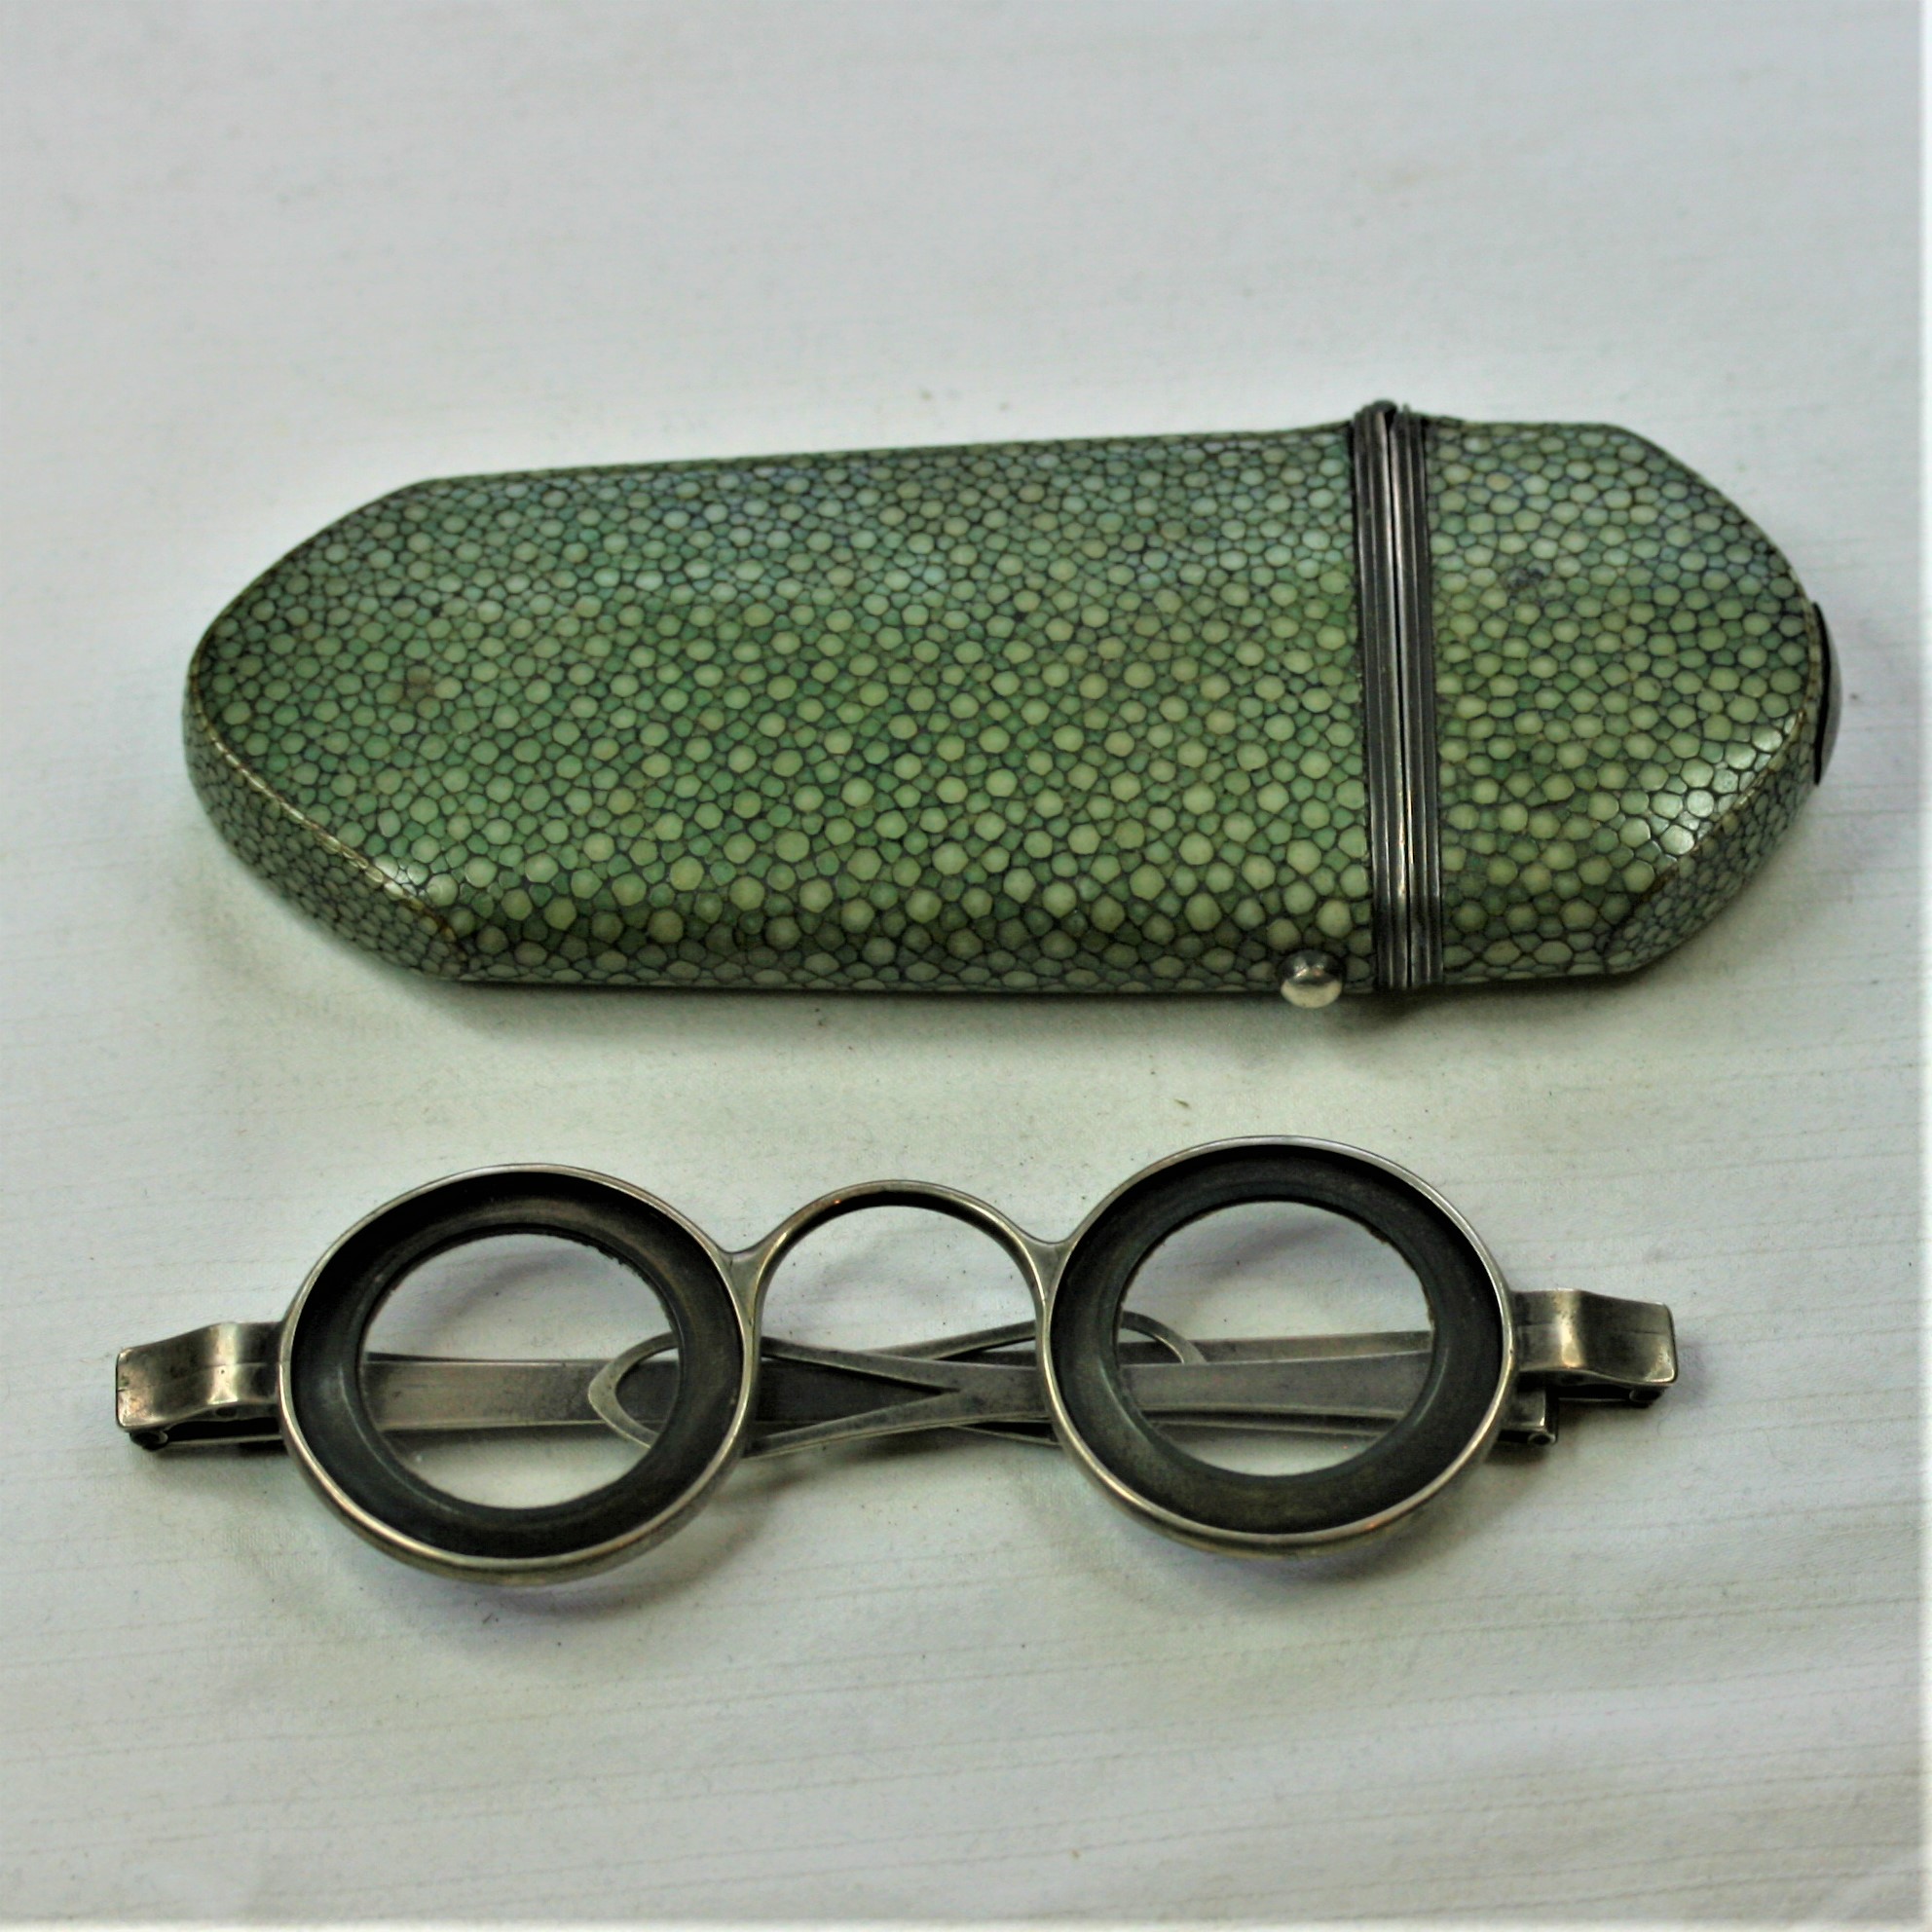 MARTIN MARGINS SILVER SPECTACLES WITH ITS ORIGINAL SHAGREEN  CASE, ALL IN EXCELLENT CONDITION